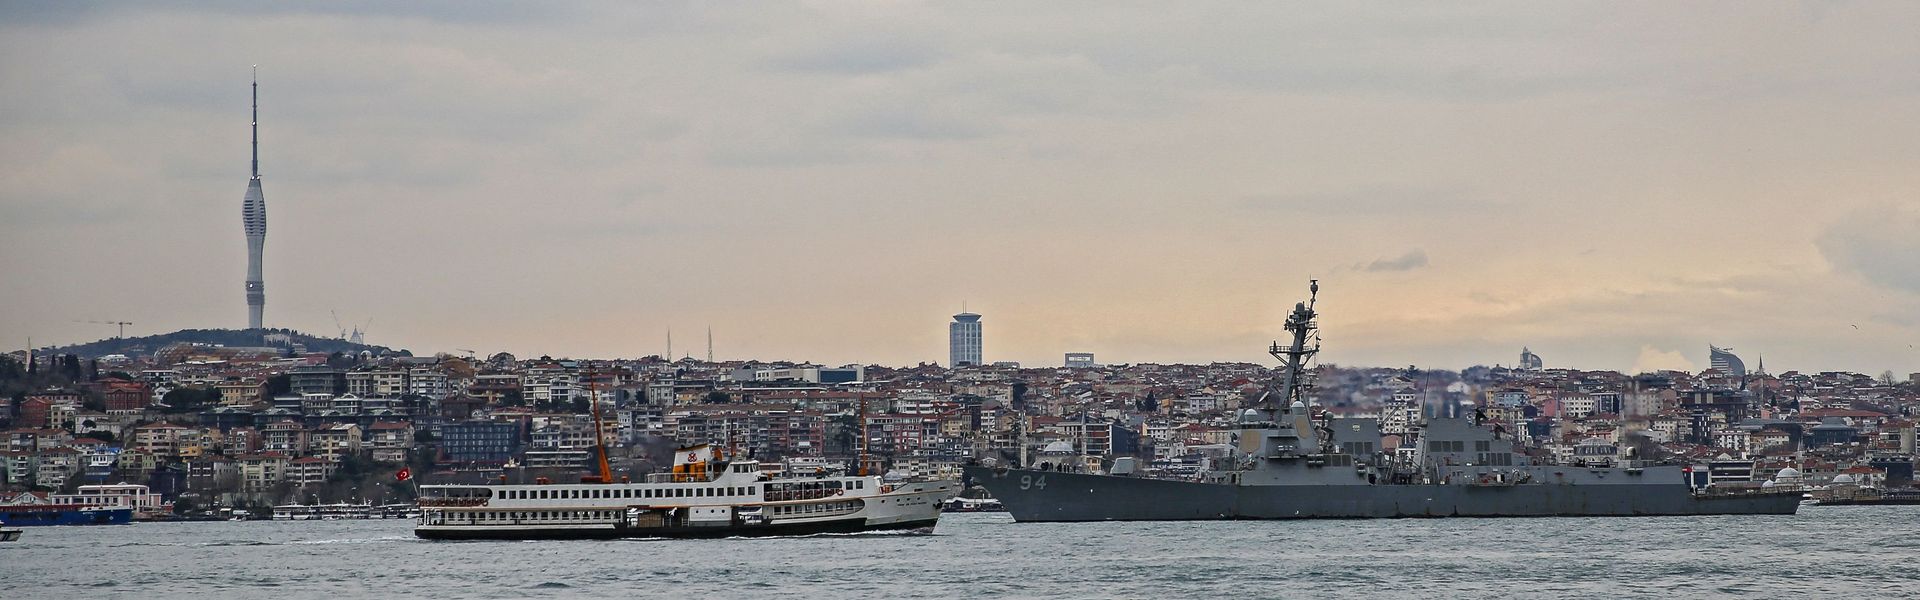 The US Navy warship USS Nitze at the edge of the Bosphorus Strait on its way to a port call in Turkey in February 2023.